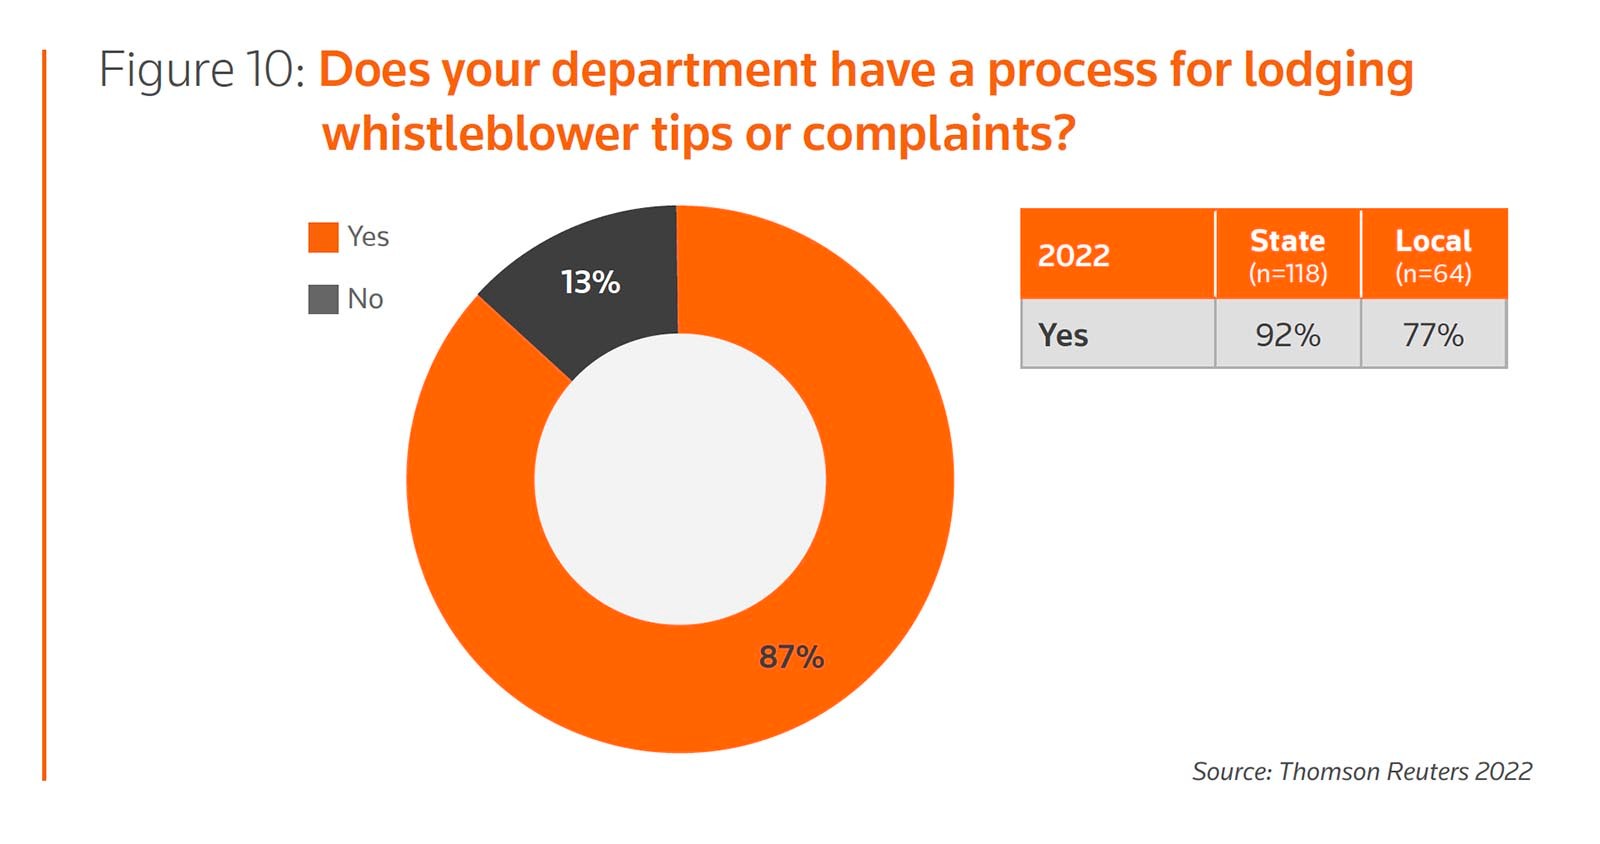 Does your department have a process for lodging whistleblower tips or complaints?